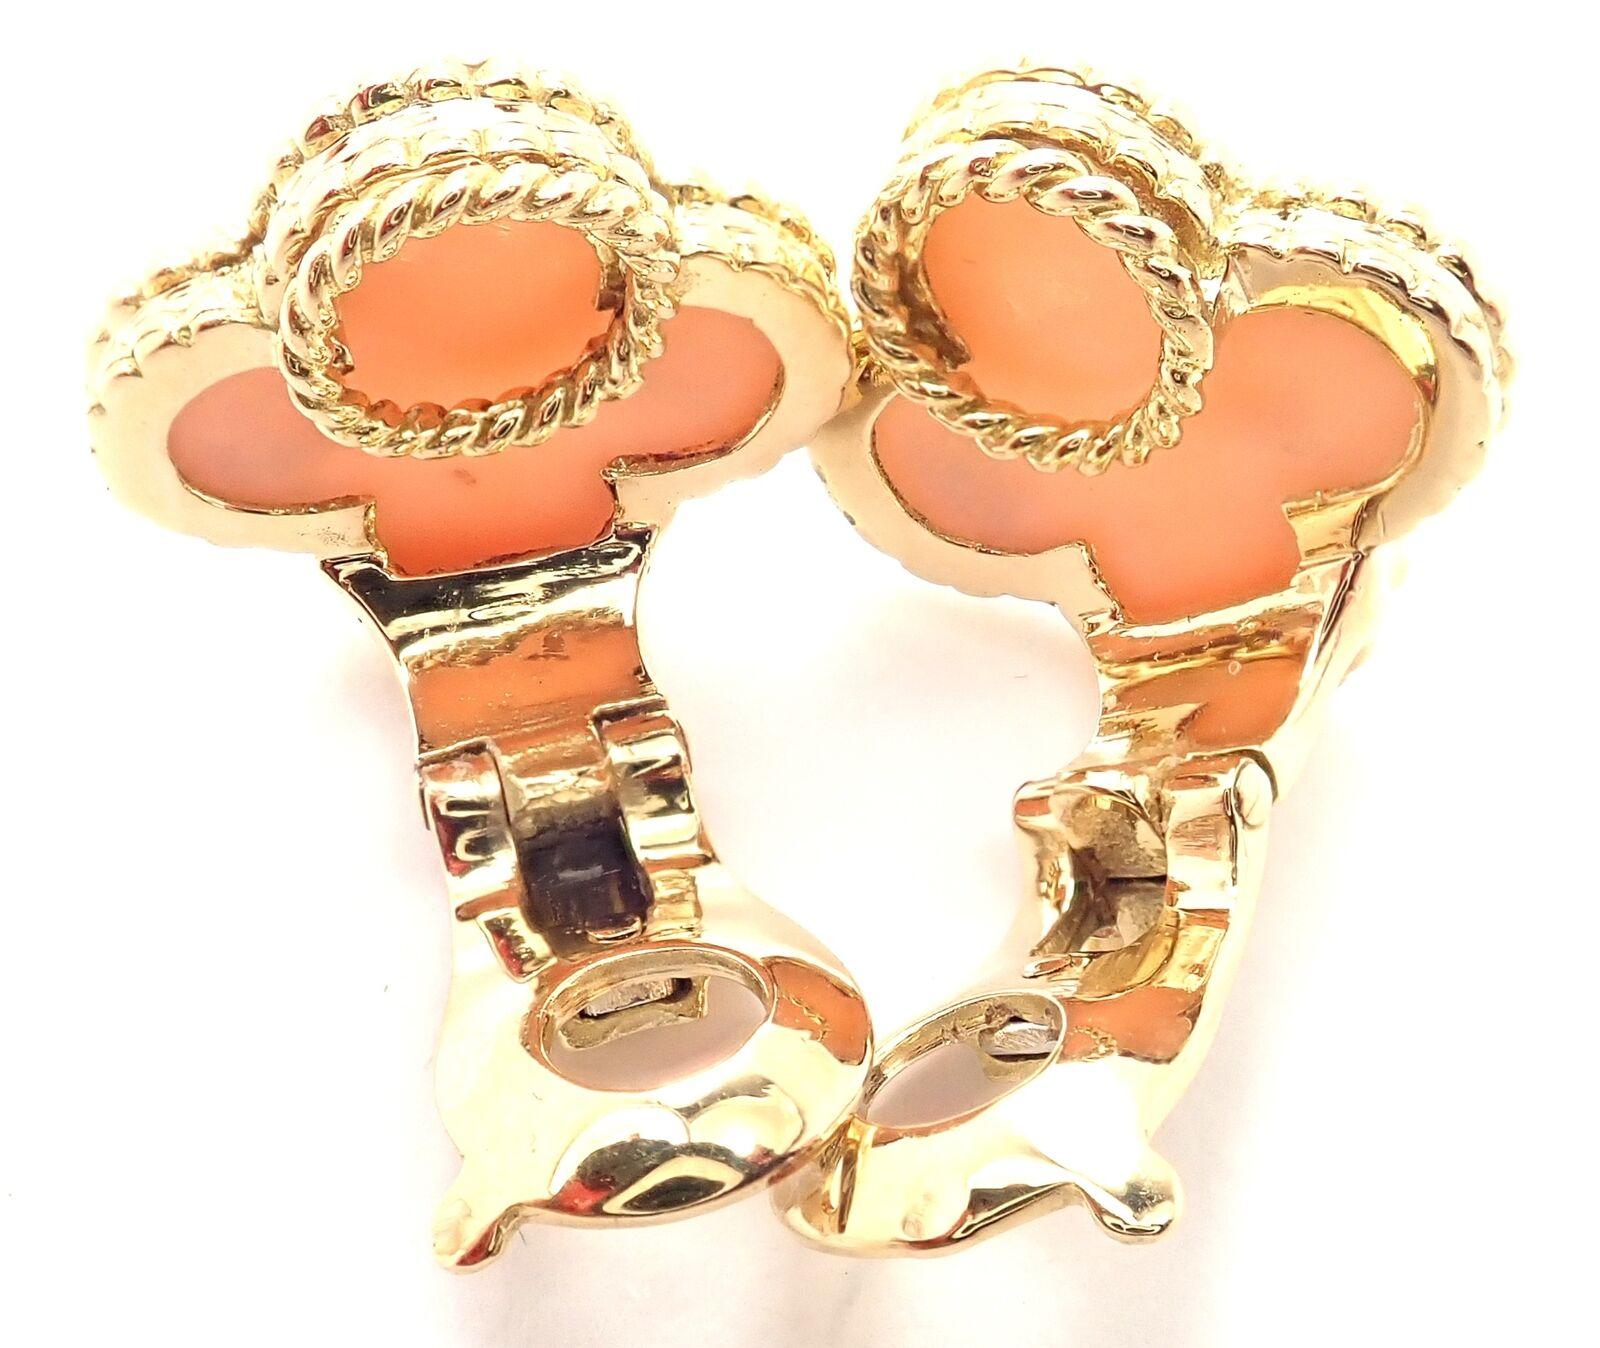 Van Cleef & Arpels Vintage Alhambra Angel Skin Coral Yellow Gold Earrings In Excellent Condition For Sale In Holland, PA